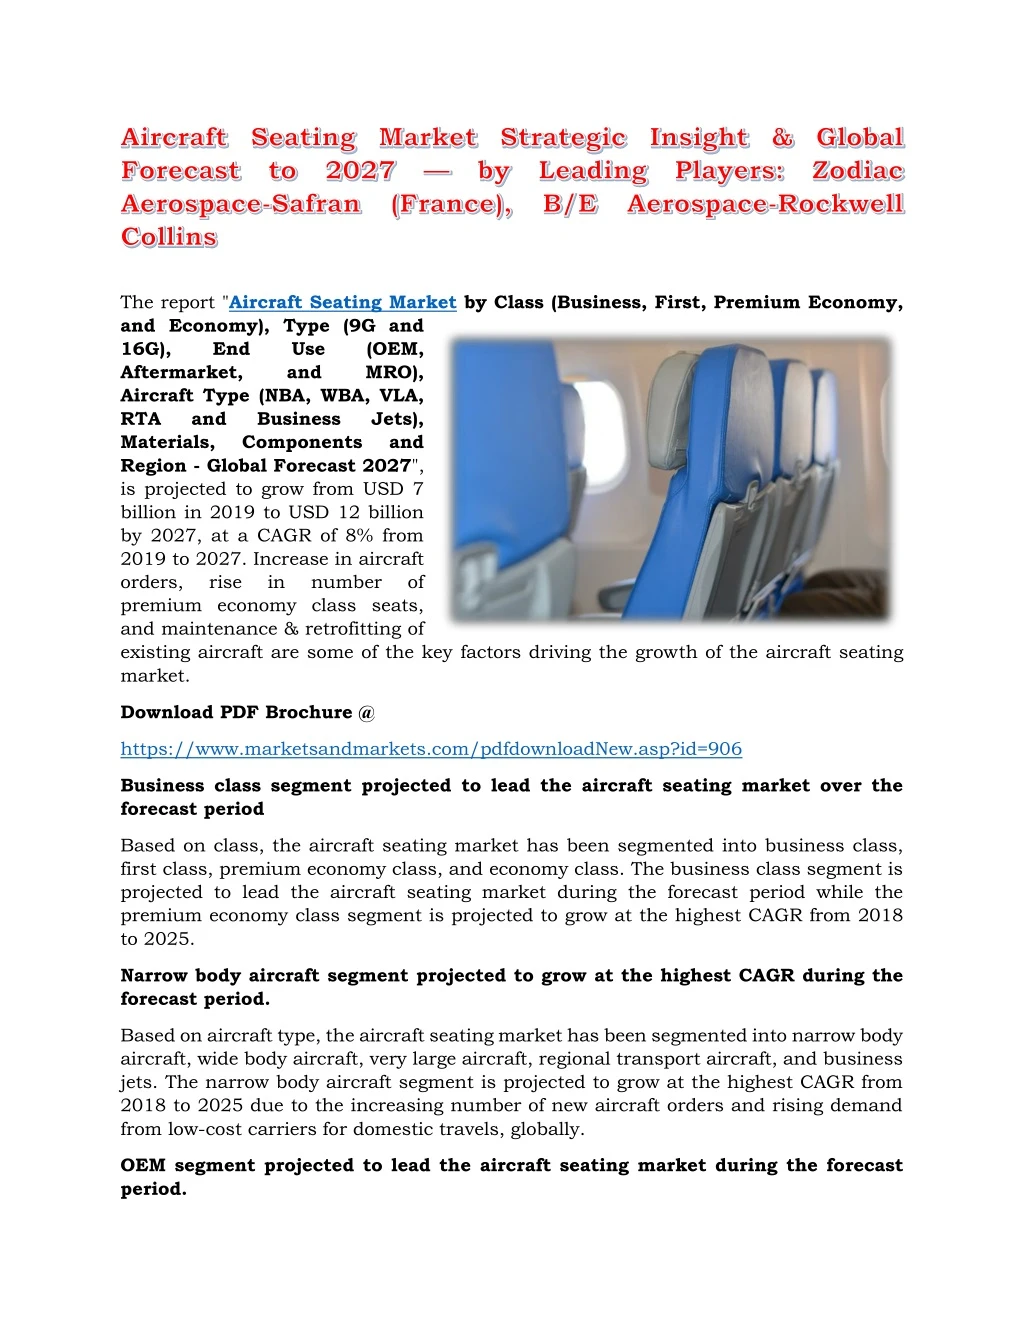 the report aircraft seating market by class